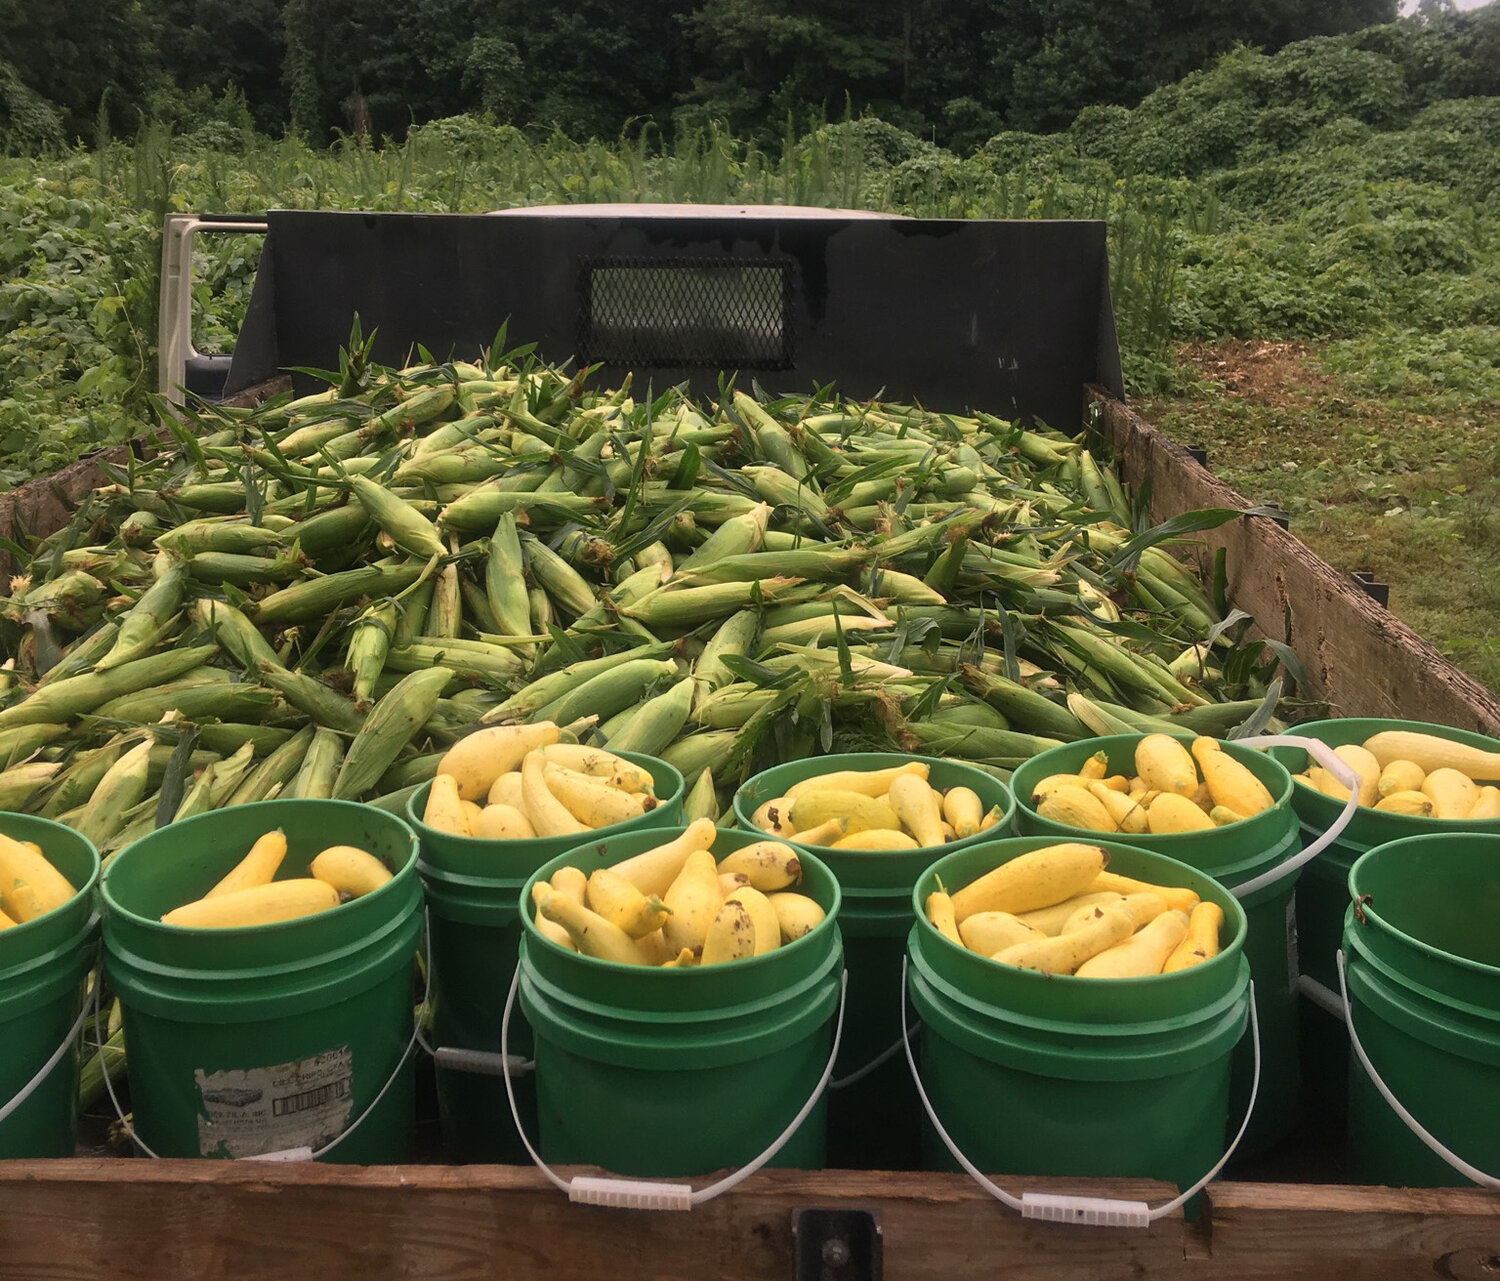 Buckets of squash and a truckload of corn will help feed those who are disadvantaged.